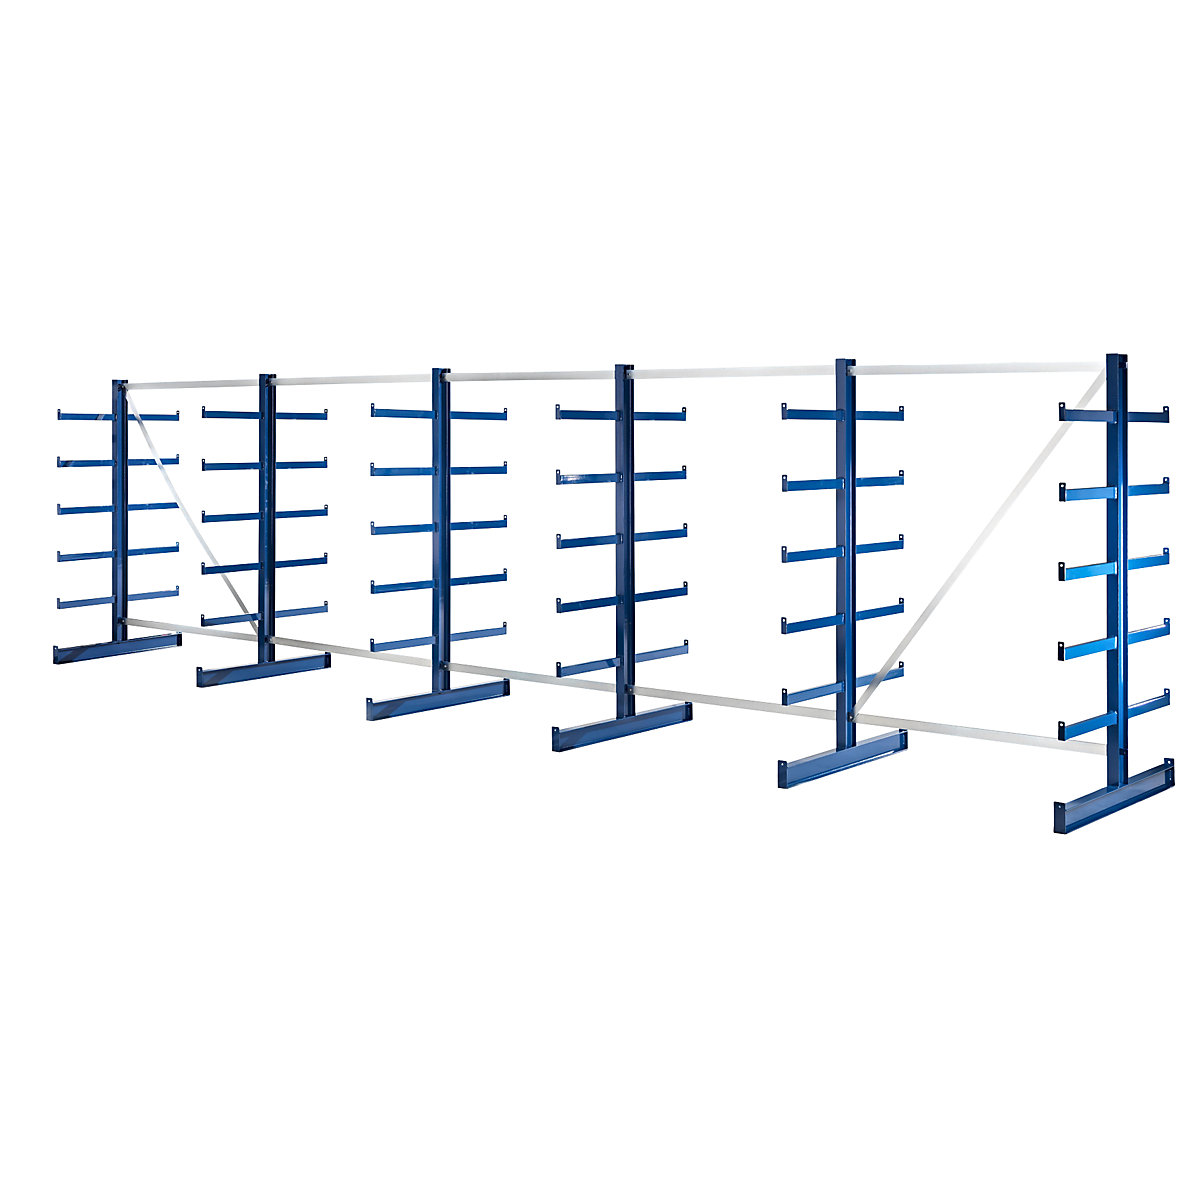 Cantilever racking unit with identical cantilever arm length – eurokraft pro, shelf unit length 6750 mm, double sided, gentian blue-3